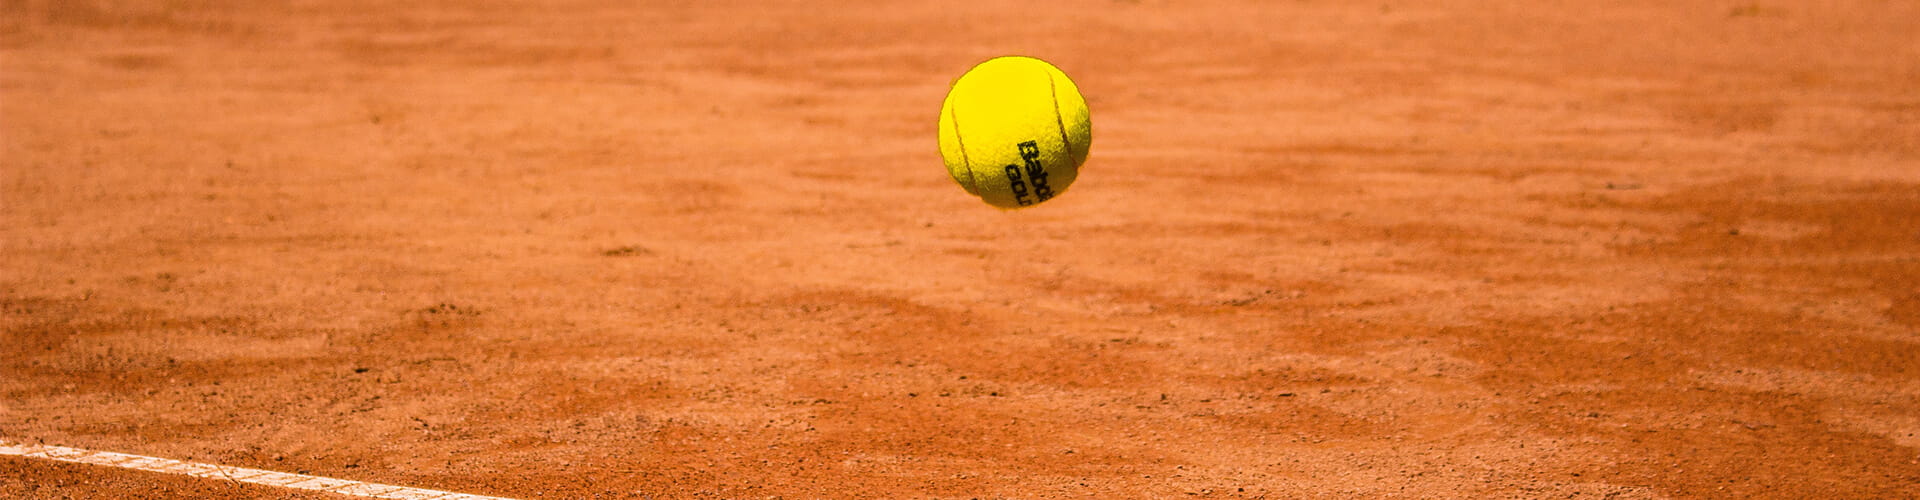 tennis ball on clay court